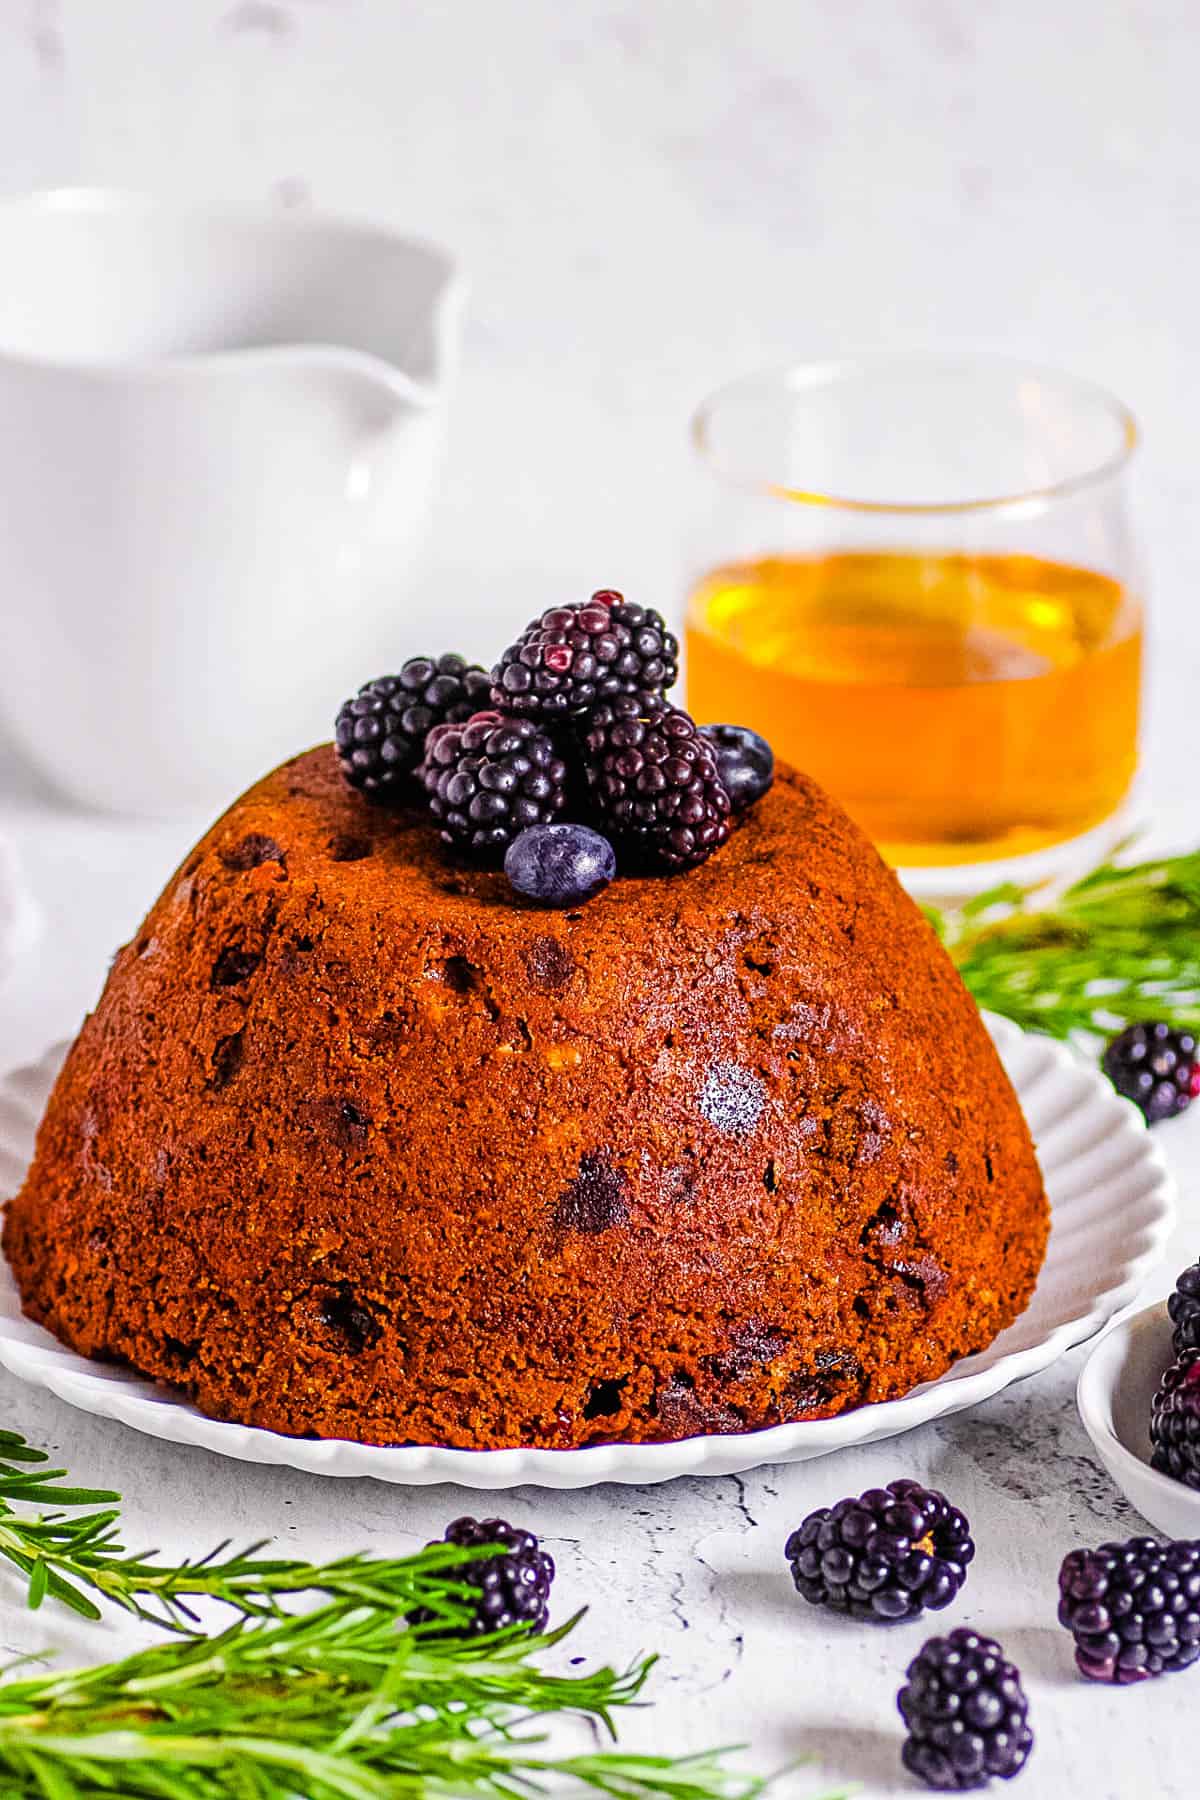 Traditional English vegan Christmas pudding topped with berries on a white plate.